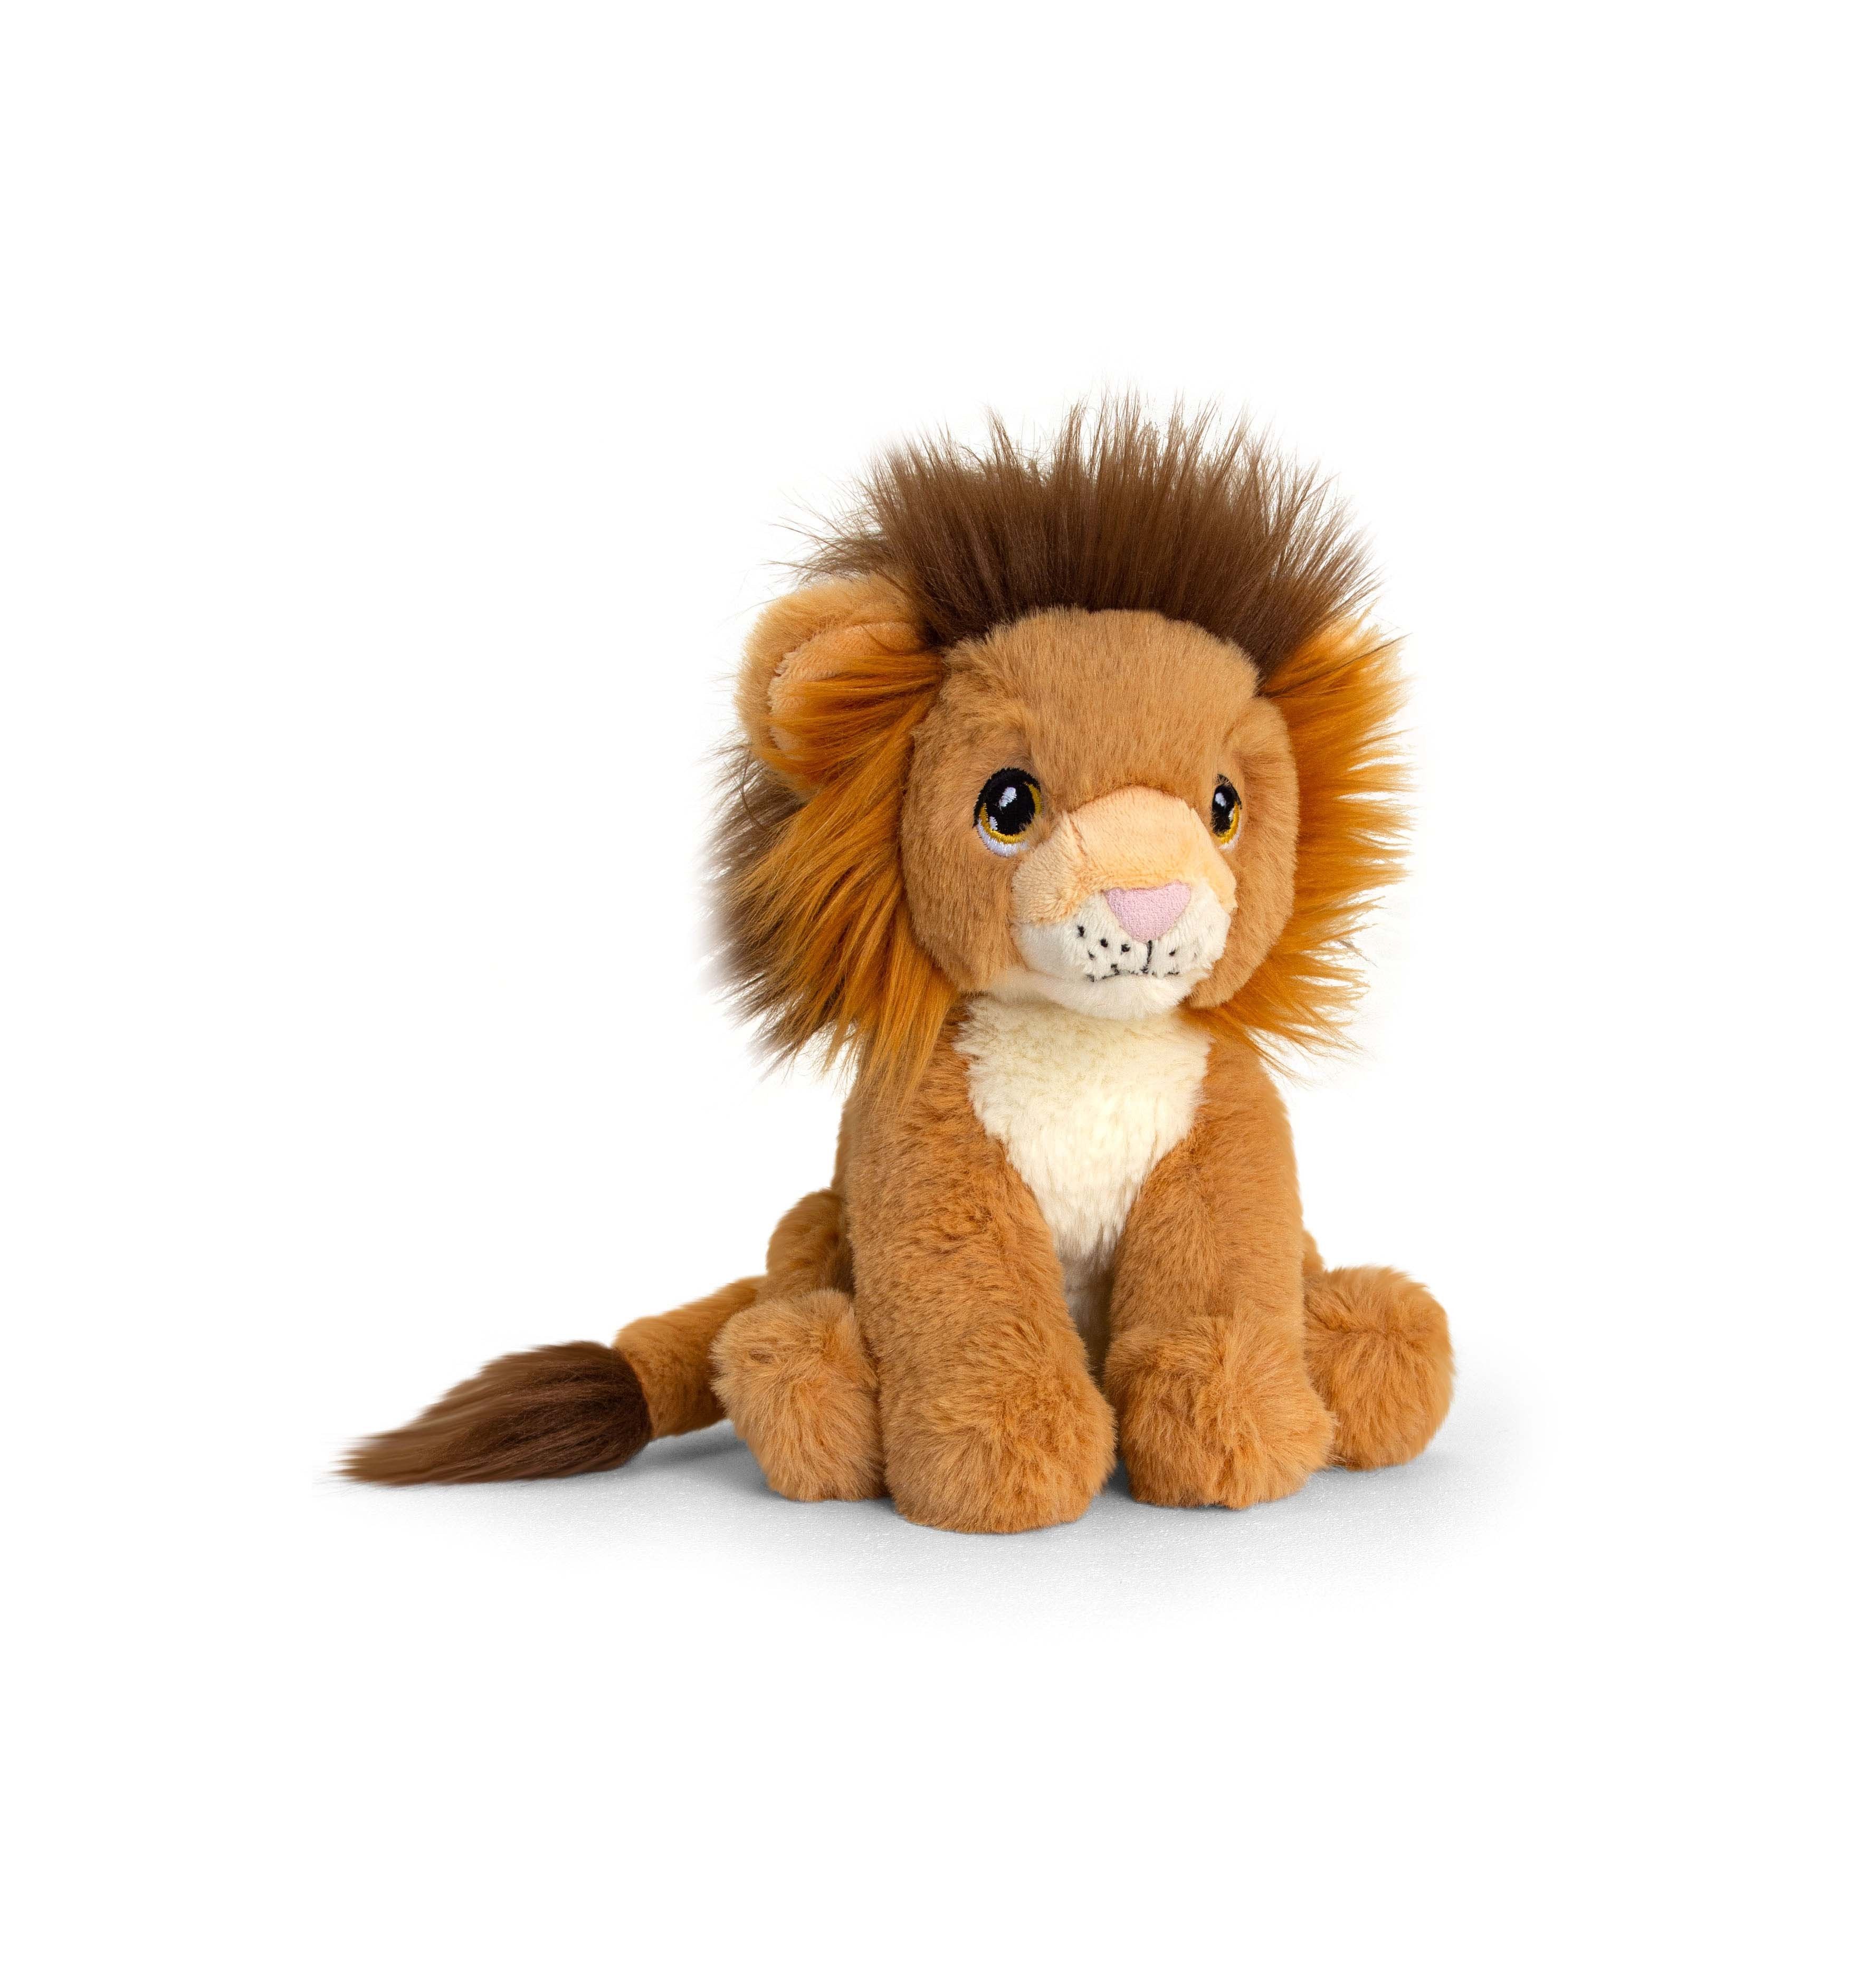 Lion Recycled Plastic Soft Toy, 18cm - eco friendly toy